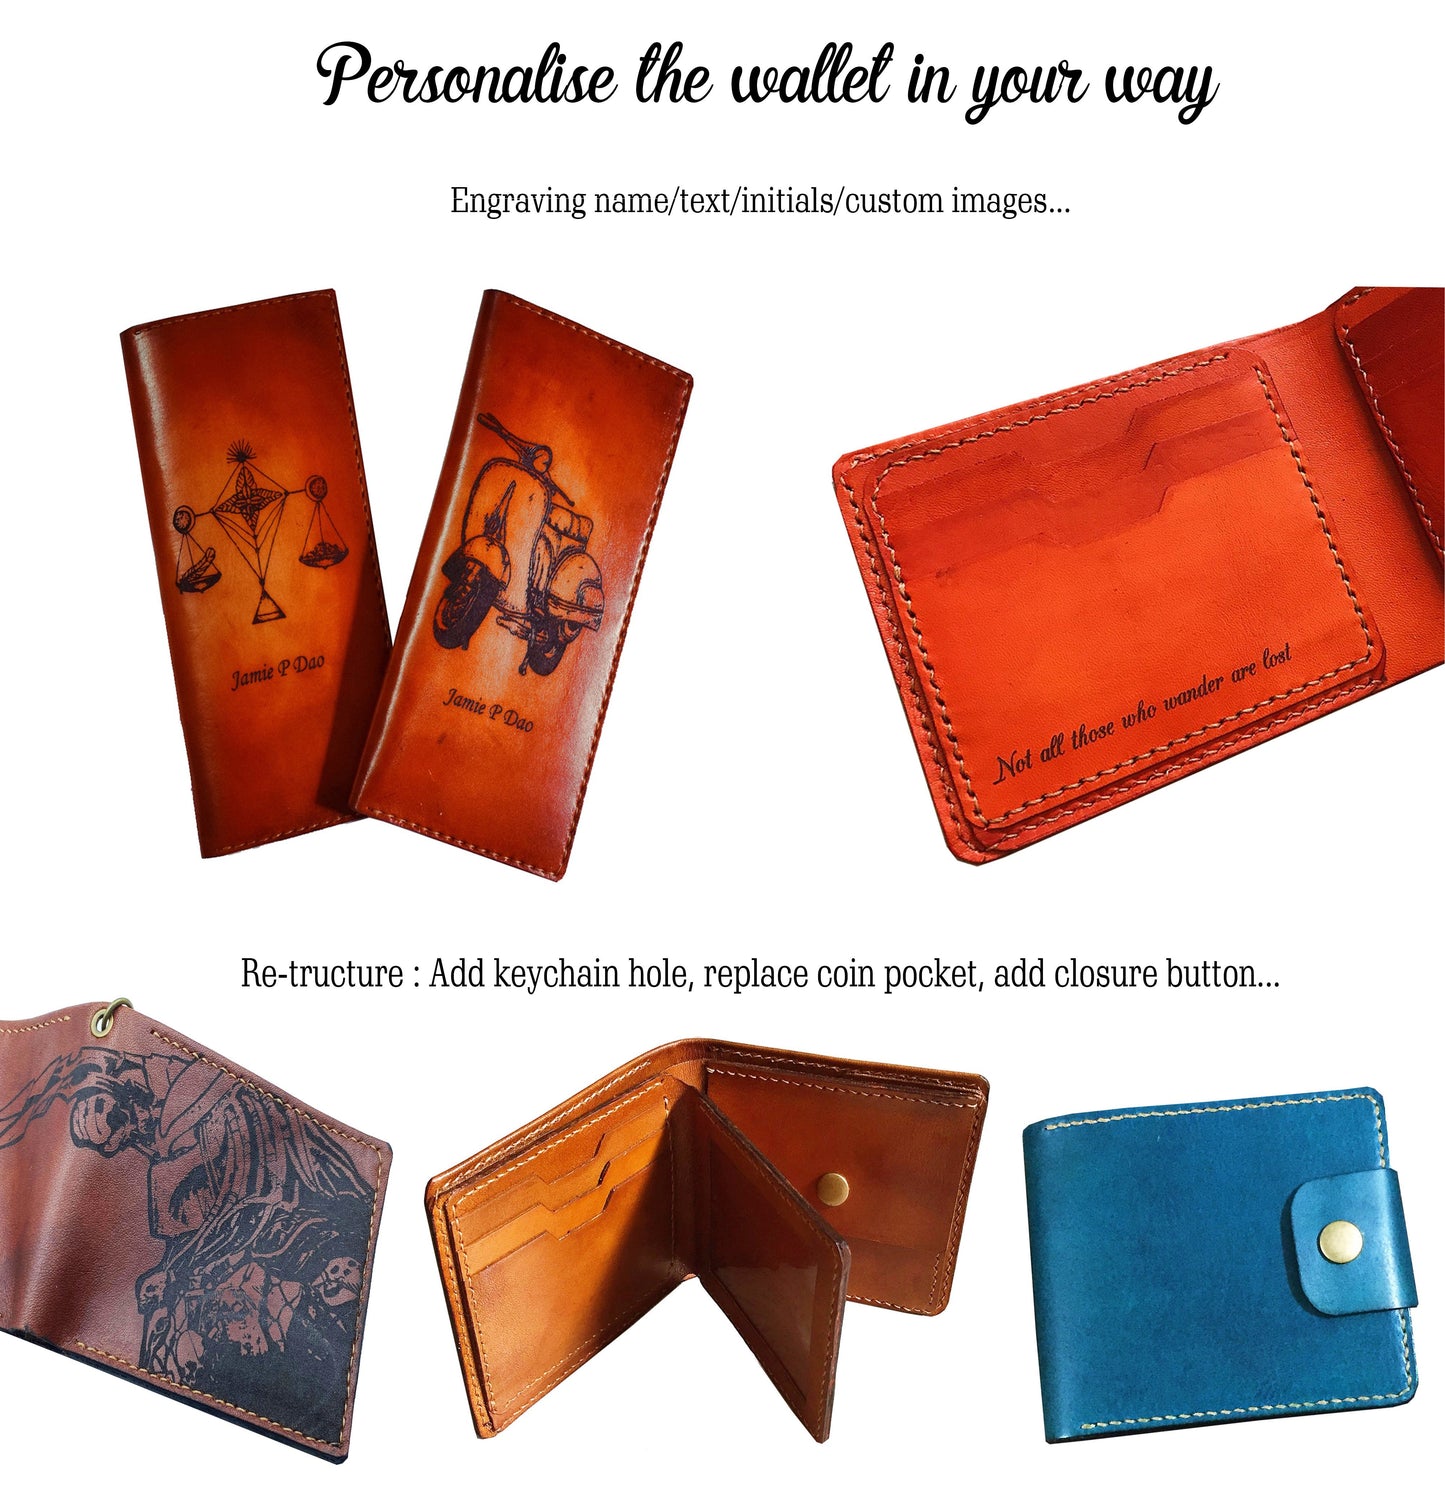 Mayan Corner - Tiger animal leather handmade men's wallet, custom gifts for him, father's day birthday gifts, anniversary gift for men